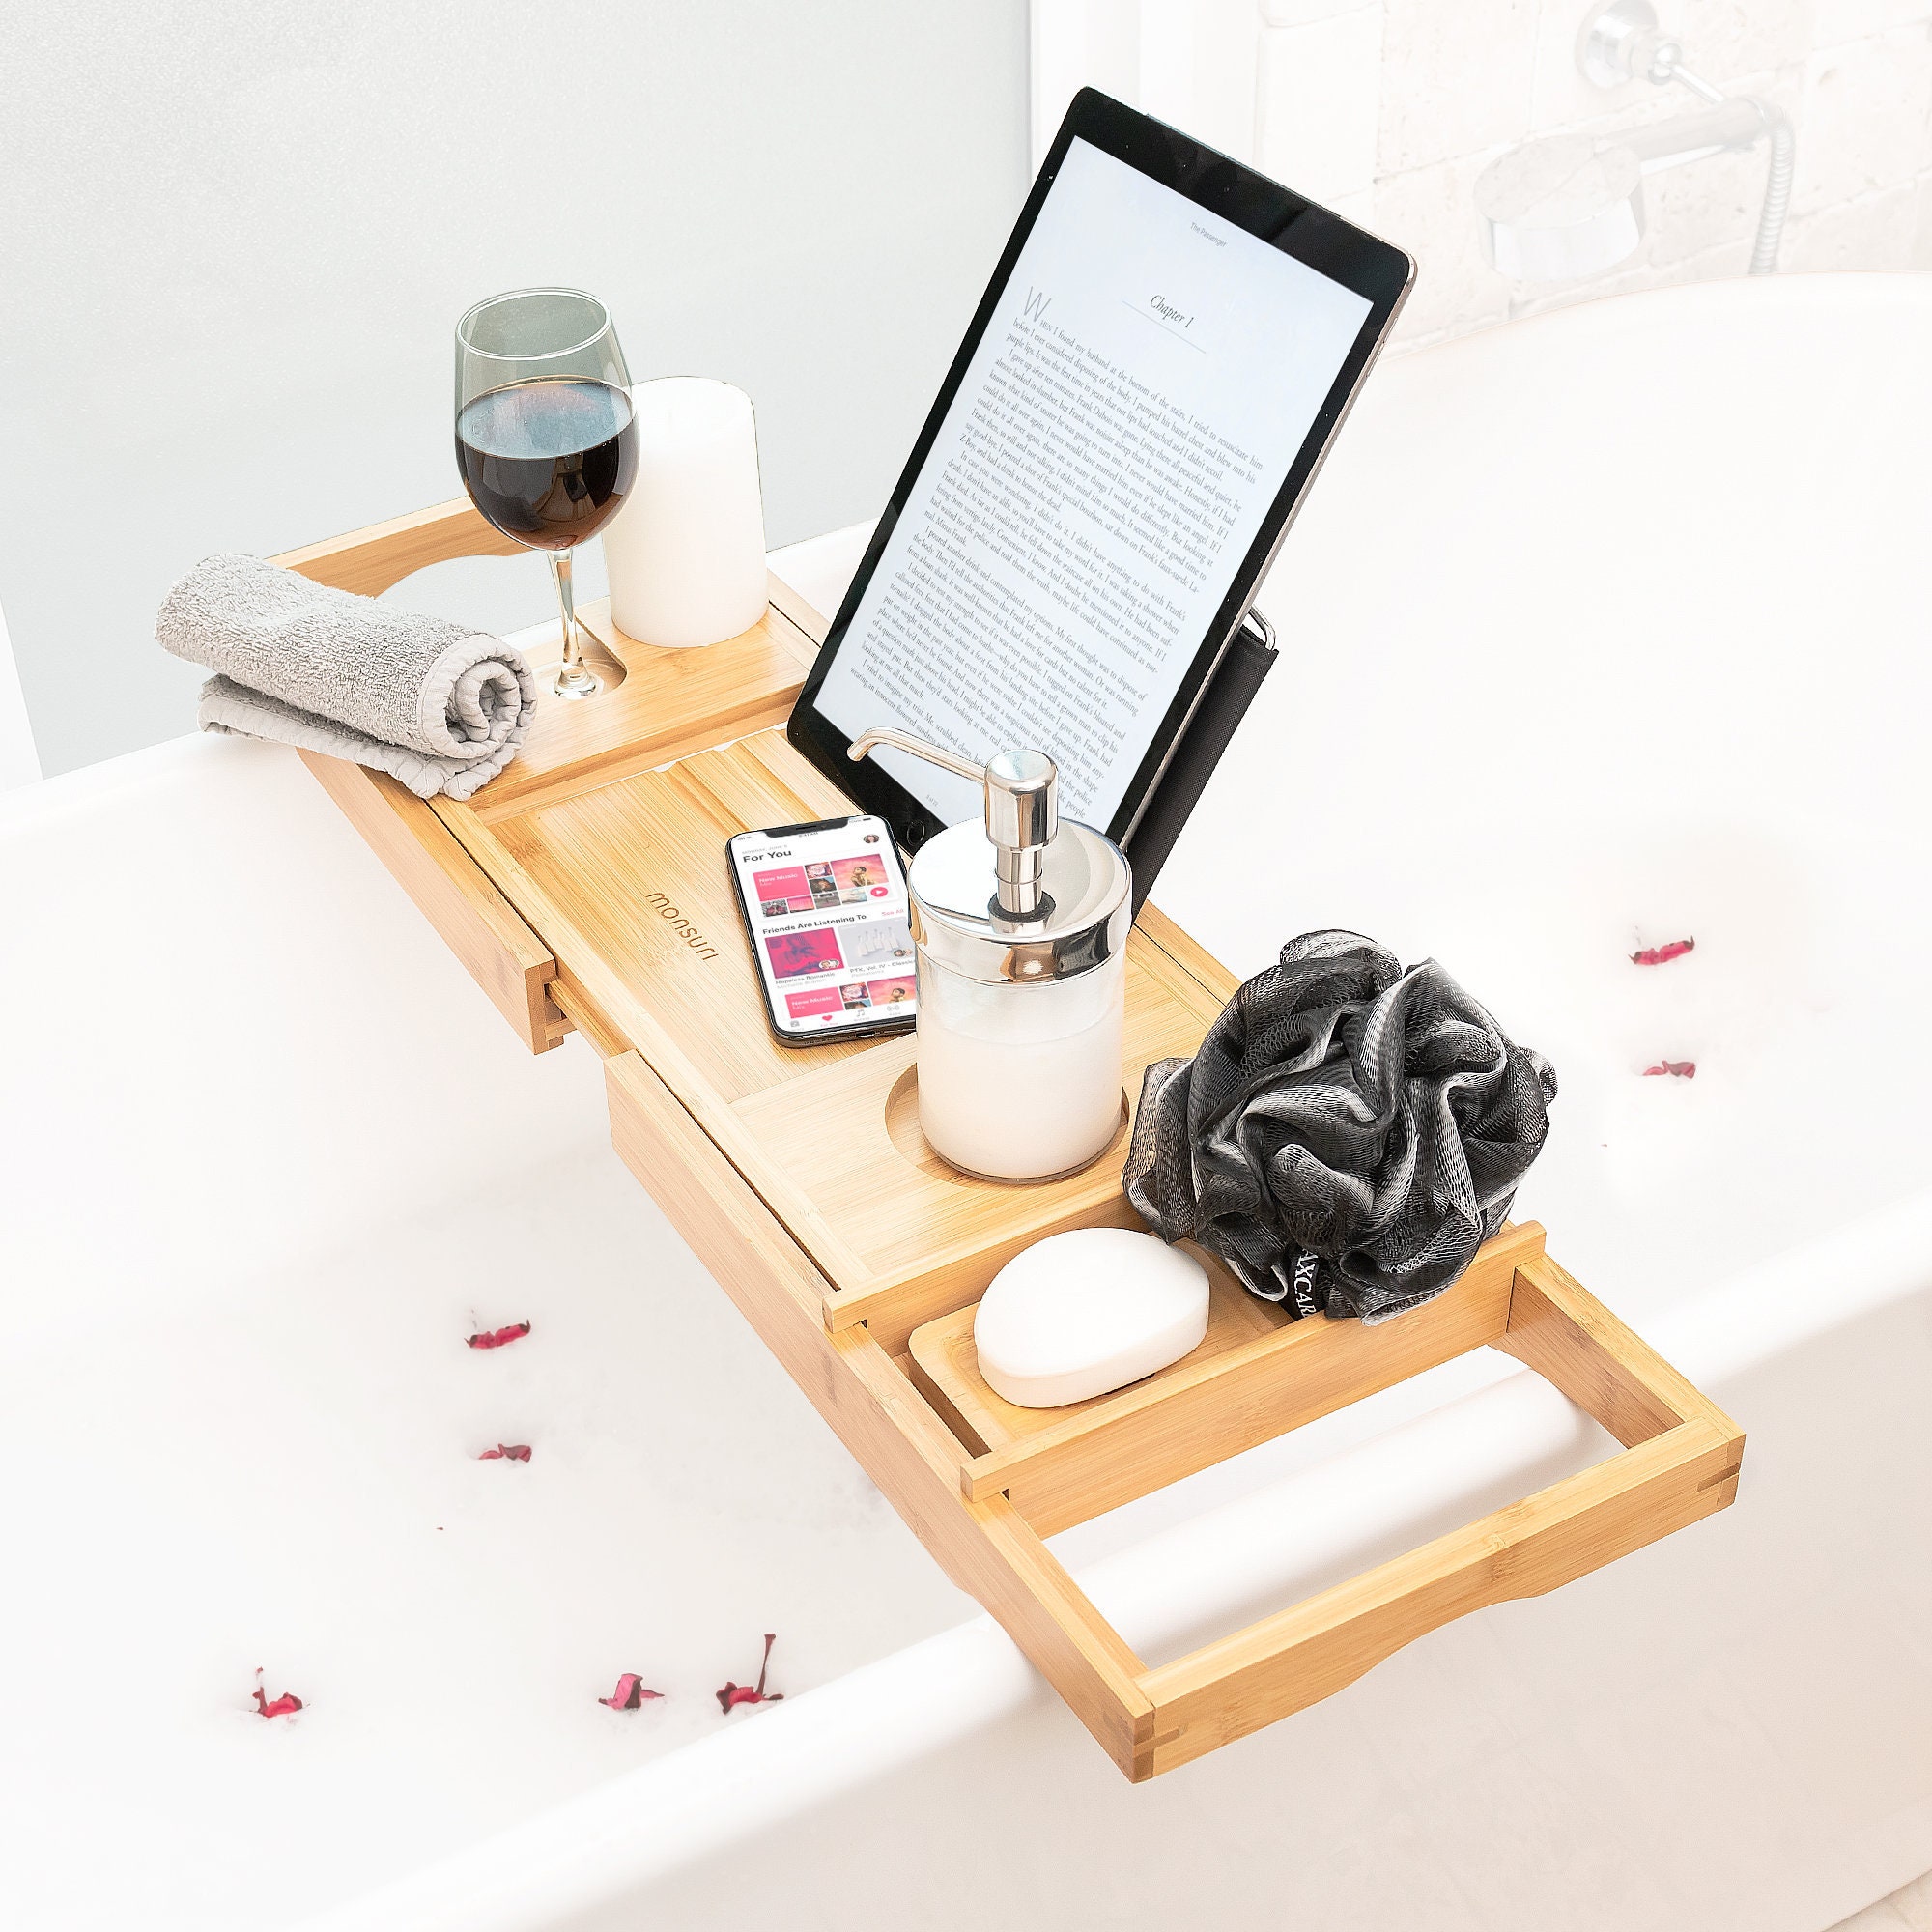 Wood Color DriSubt Bamboo Wood Bathroom Tub Rack Storage Shelf Caddy Tray Home Spa Bamboo Wood Over Tub Rack Built-in Holder for Book Tablet Phone Glass Candle Non Slip Bath Caddy Bridge 